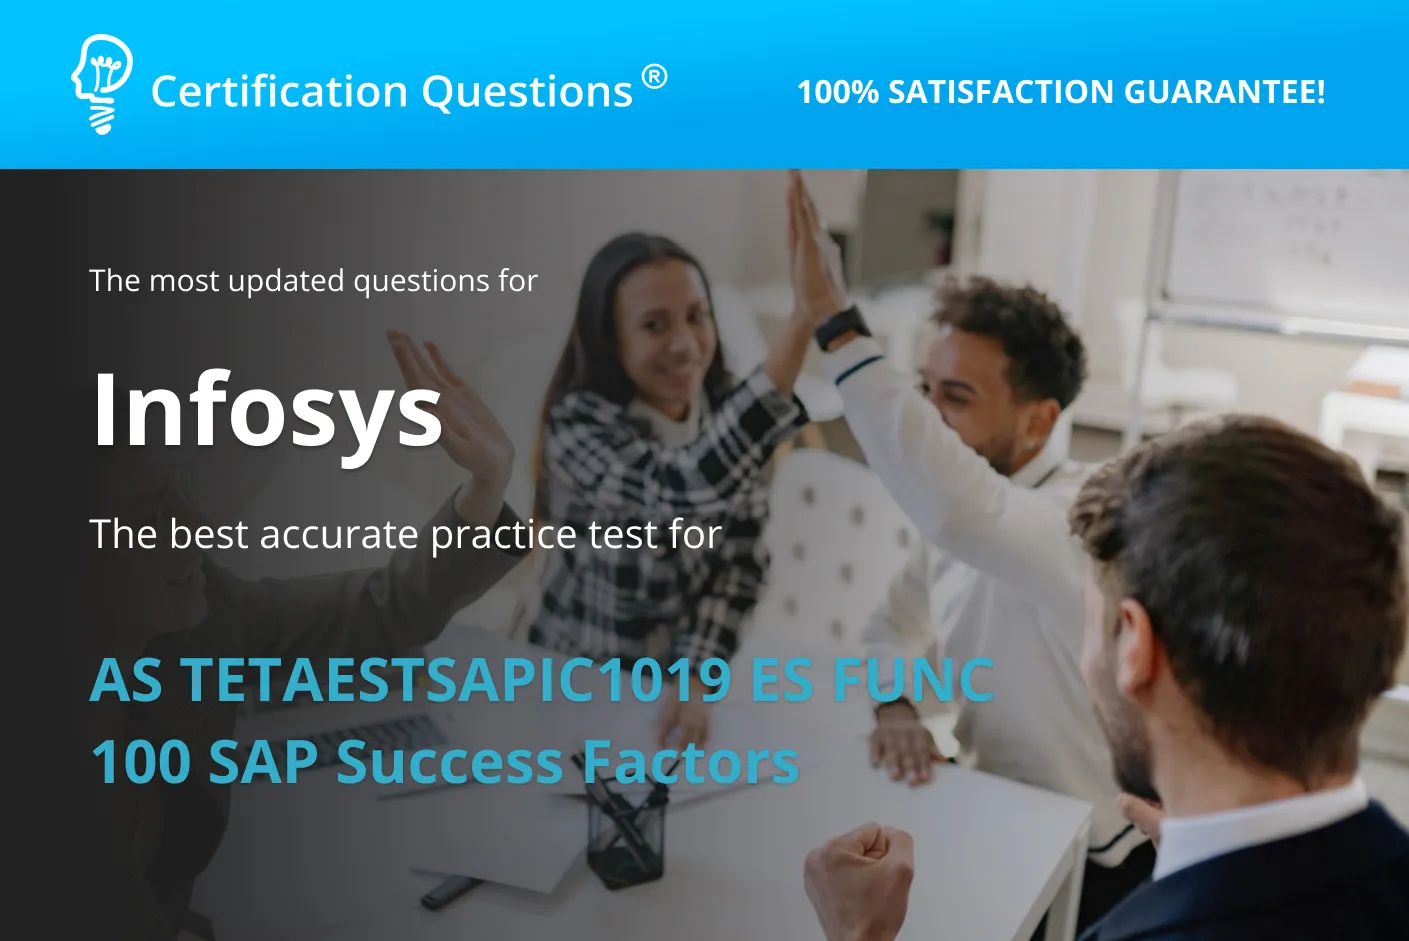 Here is the image for as tetaestsapic1019 es func 100 sap practice test.